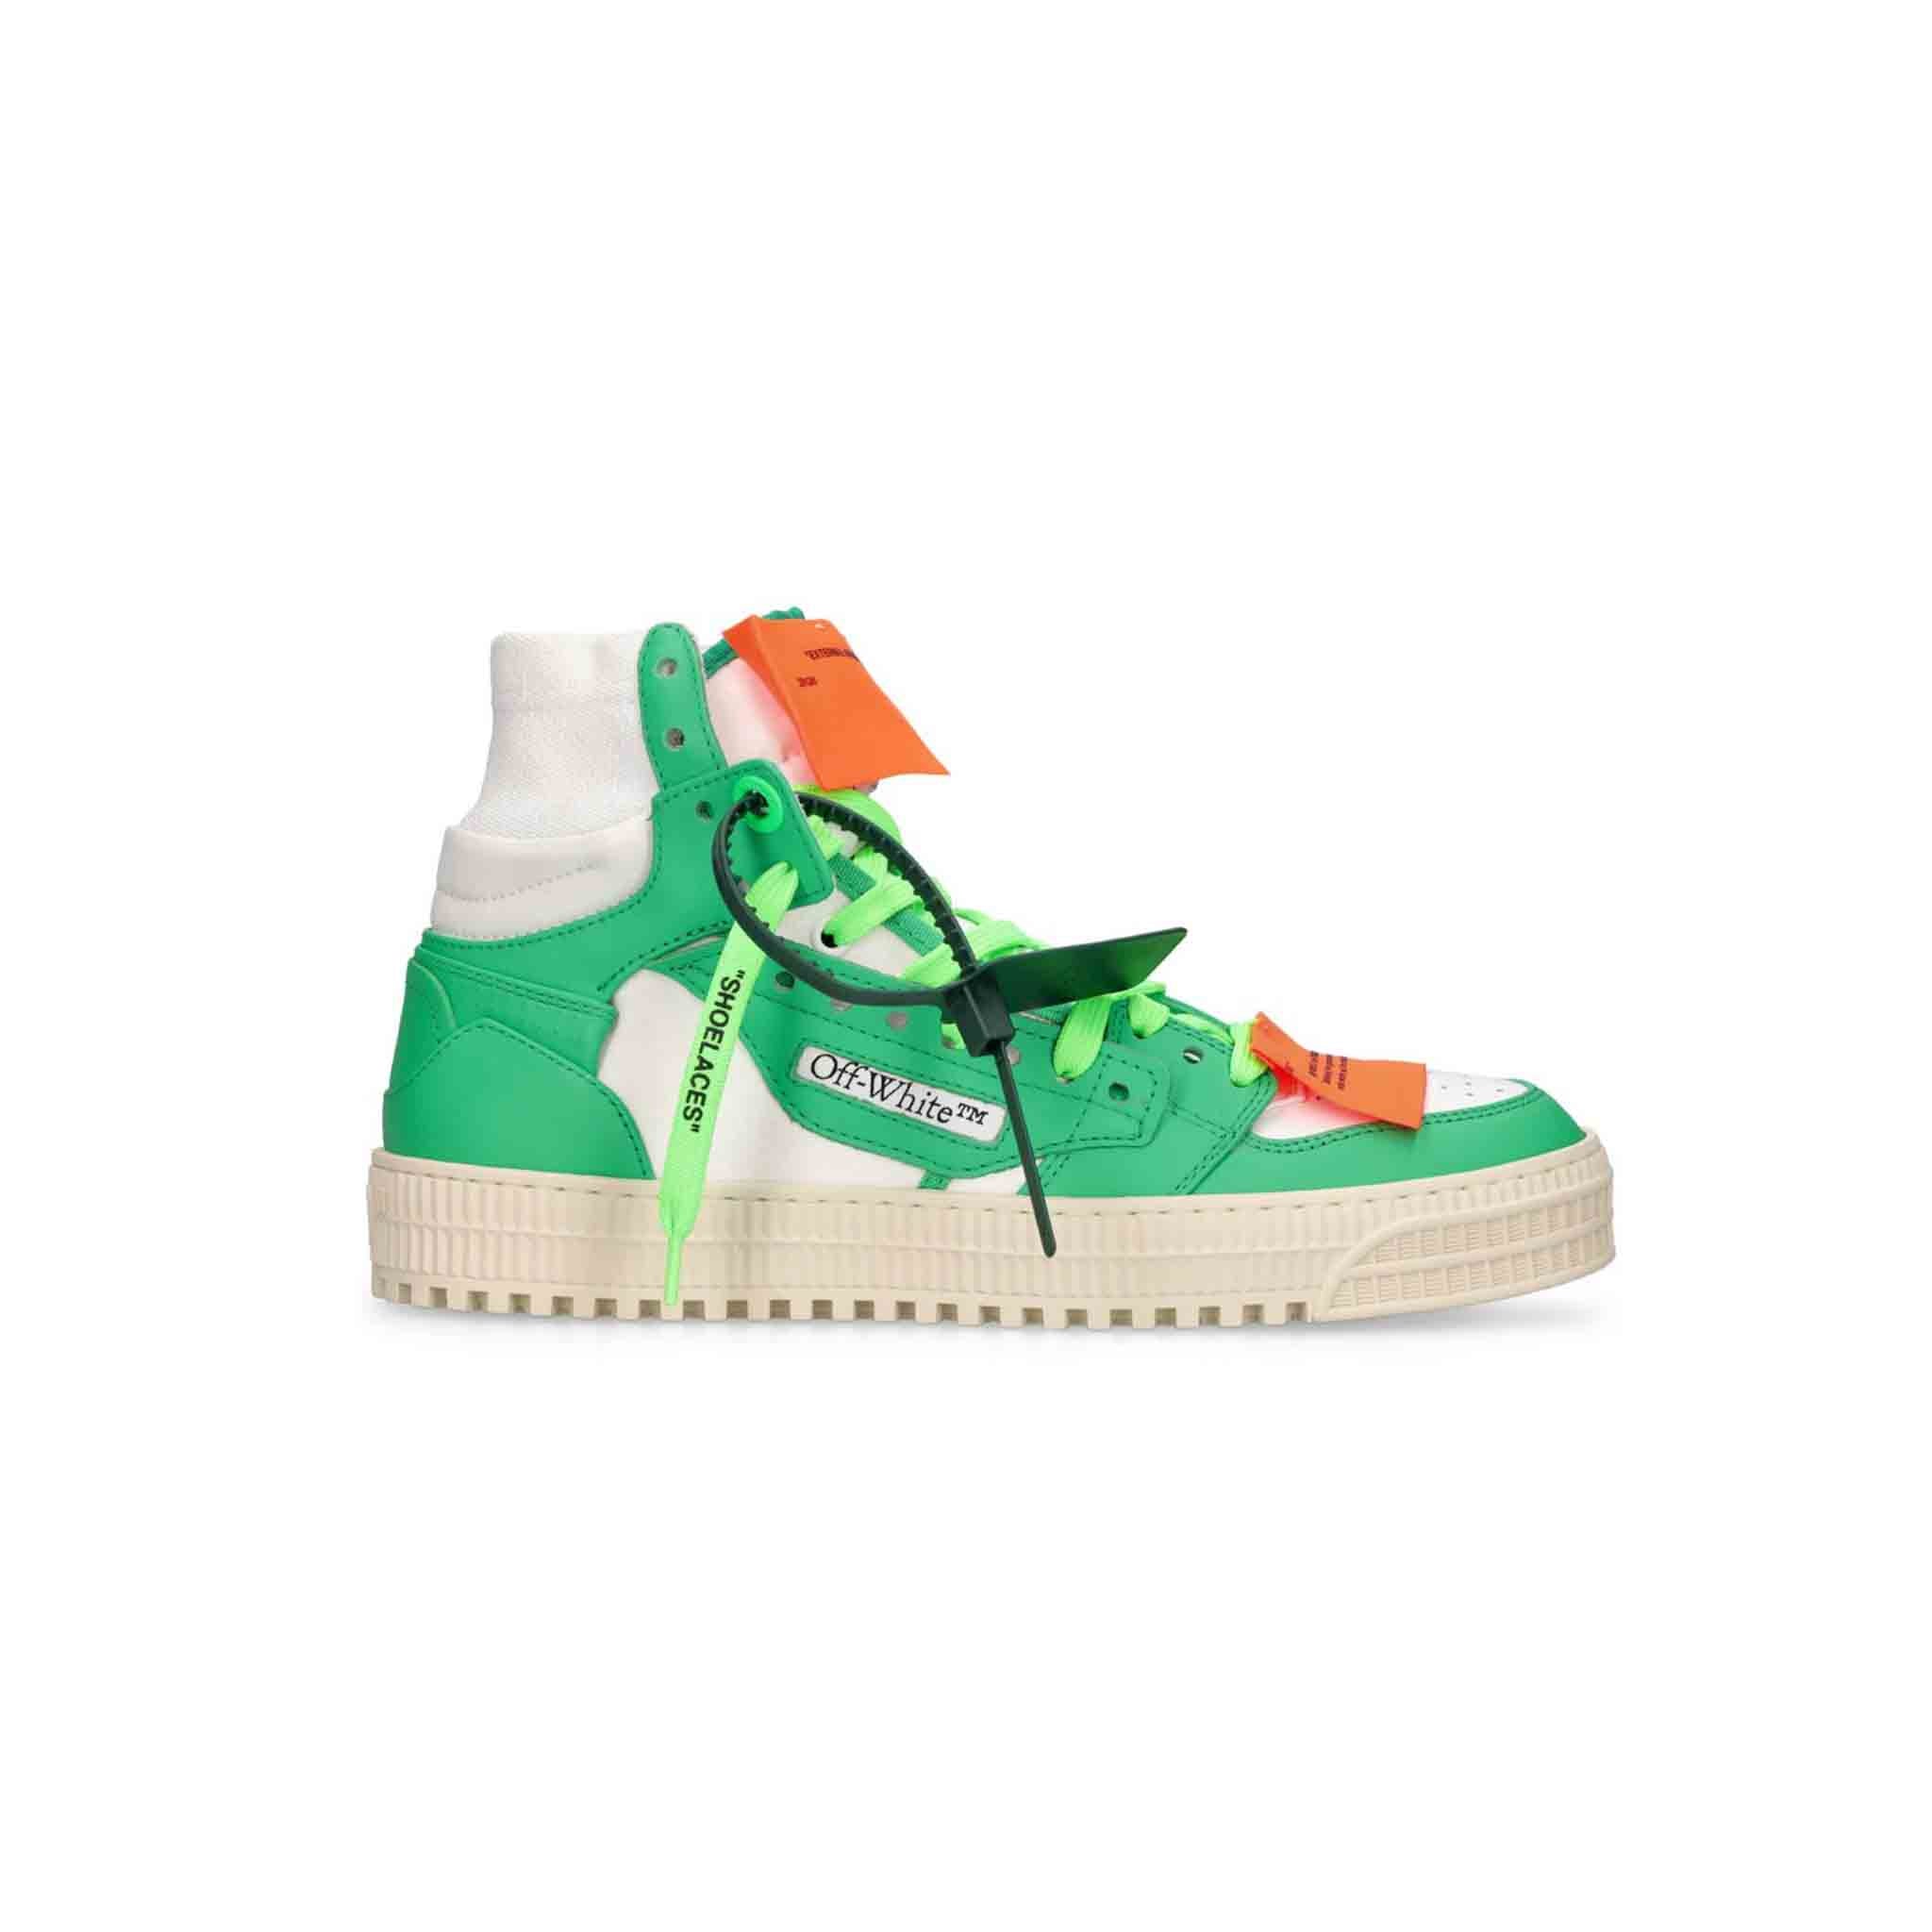 OFF-WHITE 3.0 Court Leather in Green/White